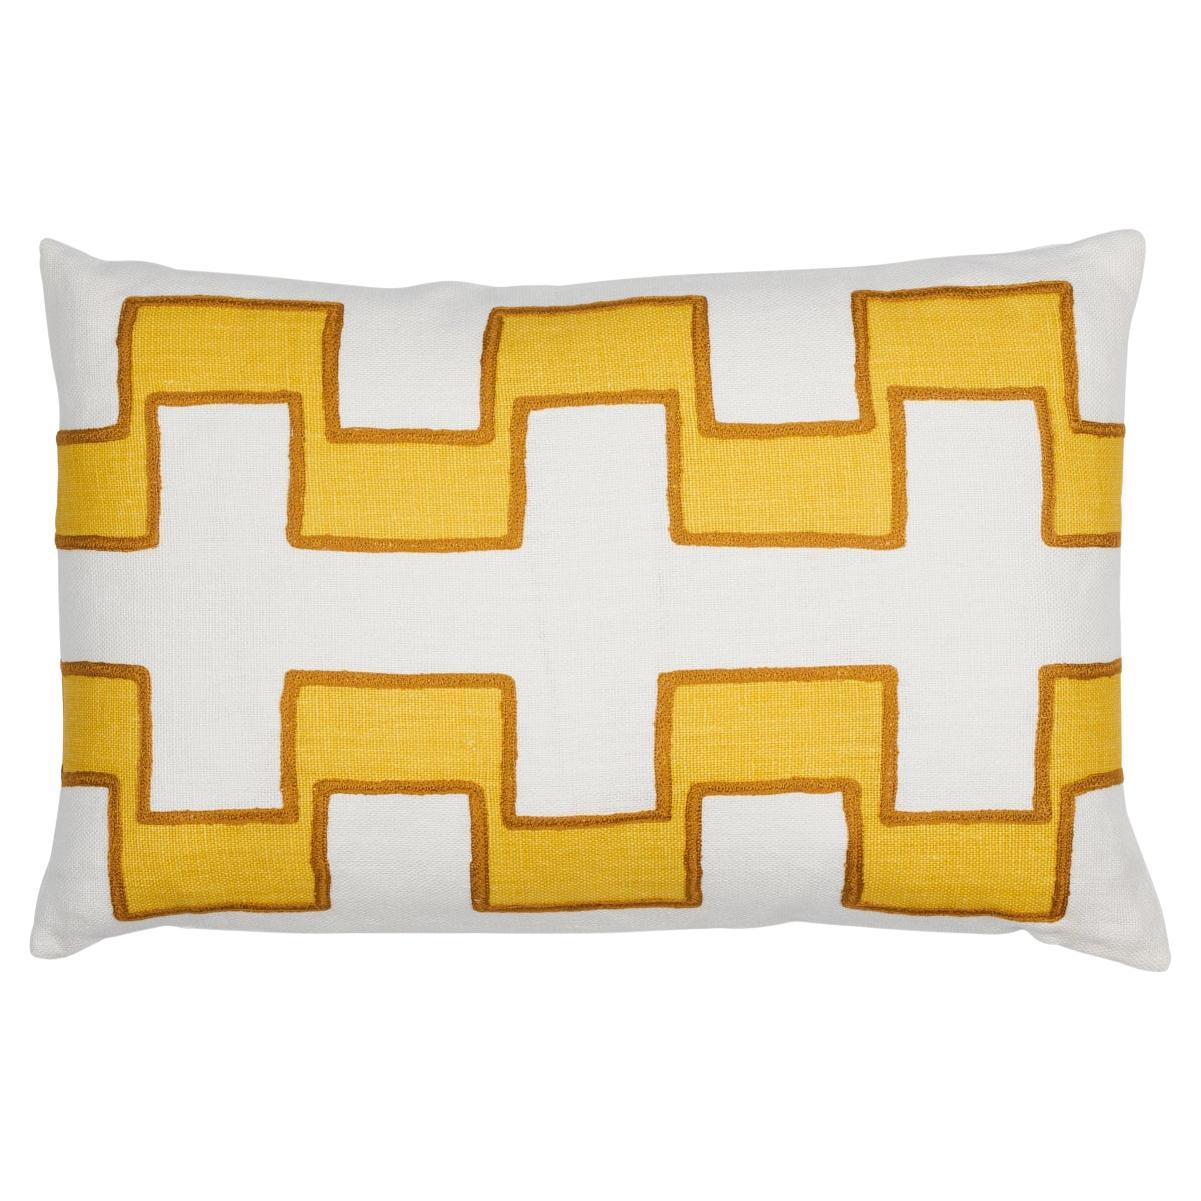 Shumacher Dixon Embroidered Print 25x16" Pillow in Yellow For Sale